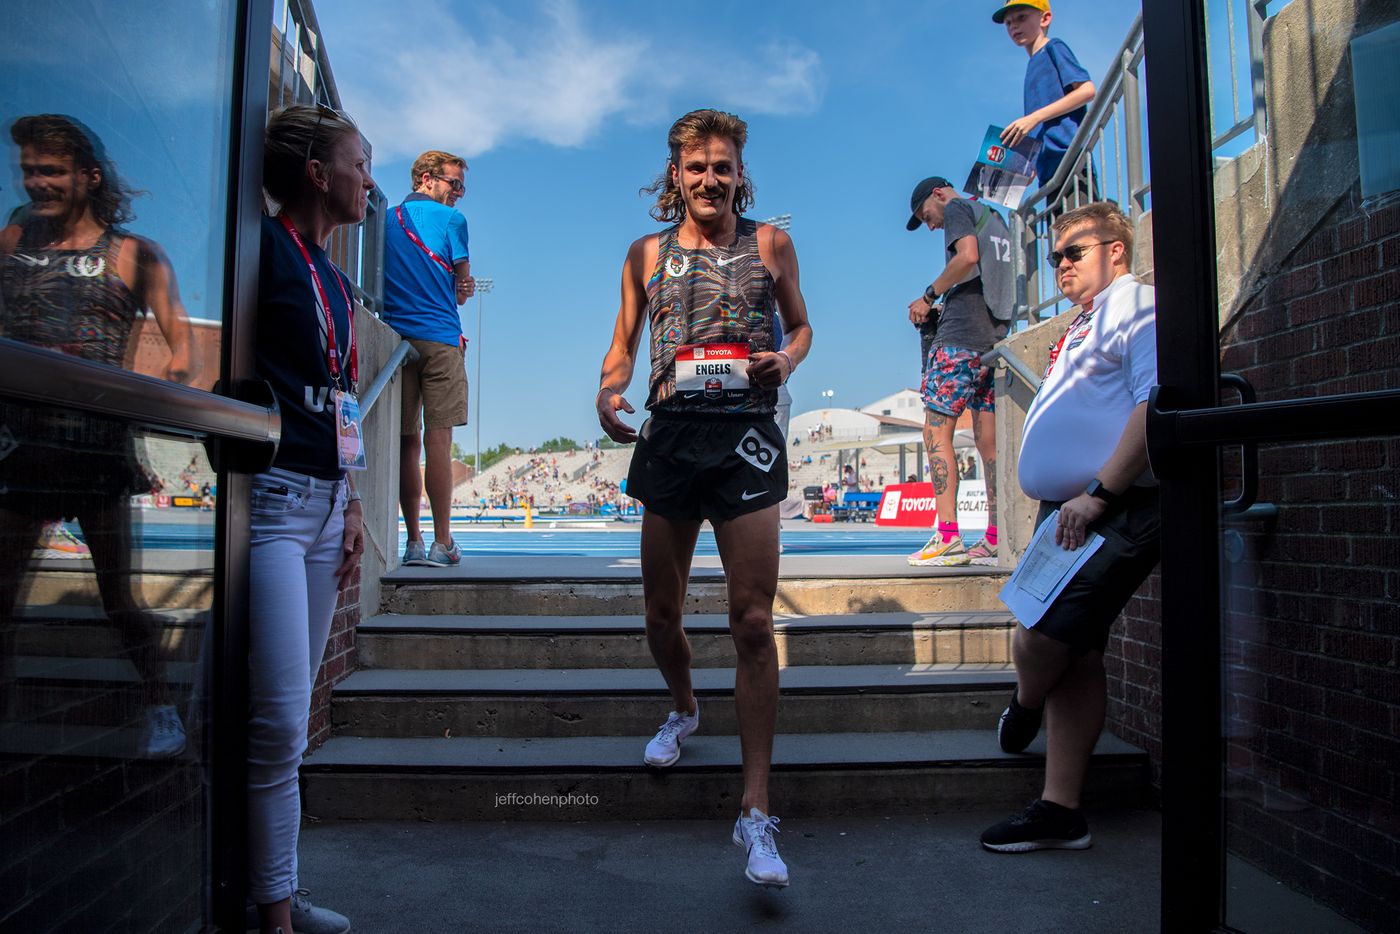 2019-USATF-Outdoor-Champs-day-2-engels-1500m--3738---jeff-cohen-photo--web.jpg